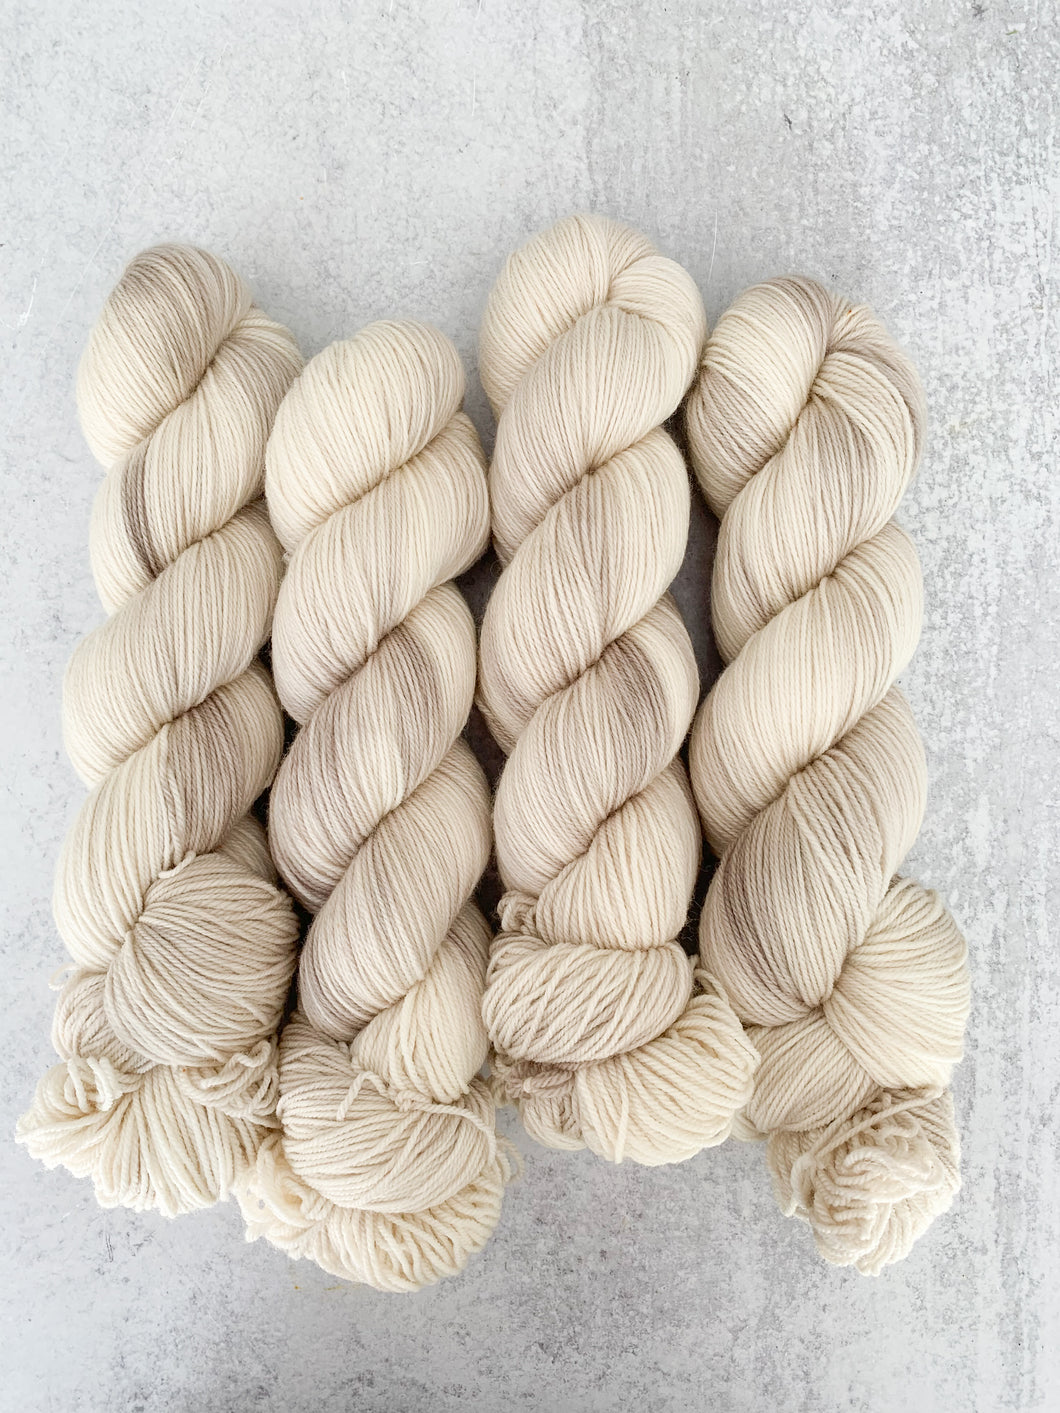 White Russian Rambouillet Worsted Yarn